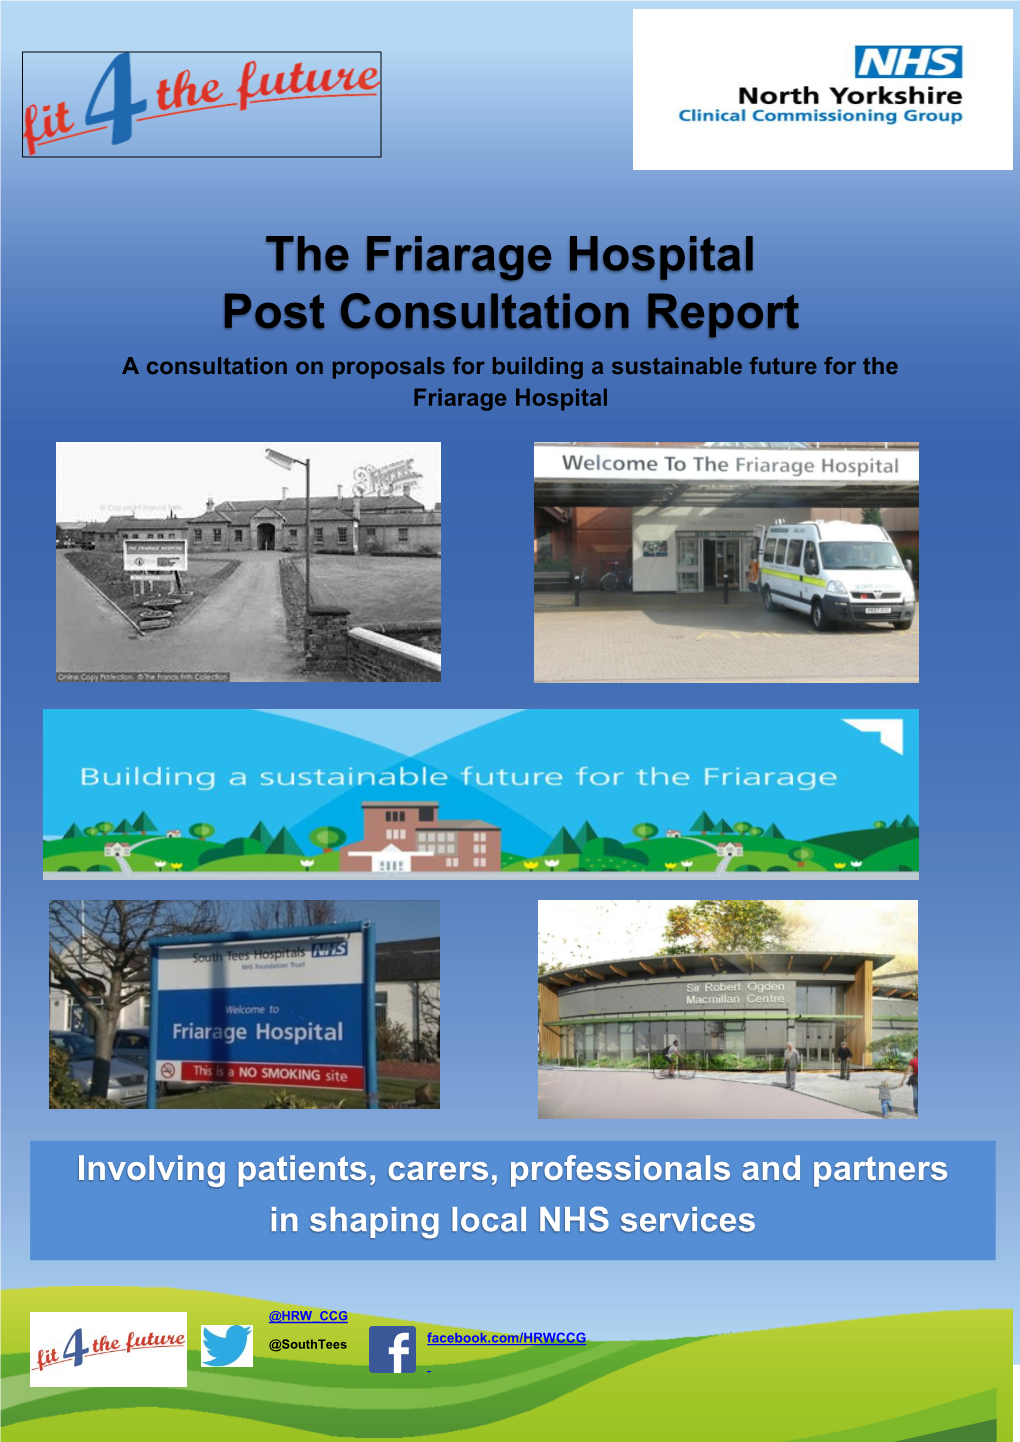 The Friarage Hospital Post Consultation Report a Consultation on Proposals for Building a Sustainable Future for the Friarage Hospital